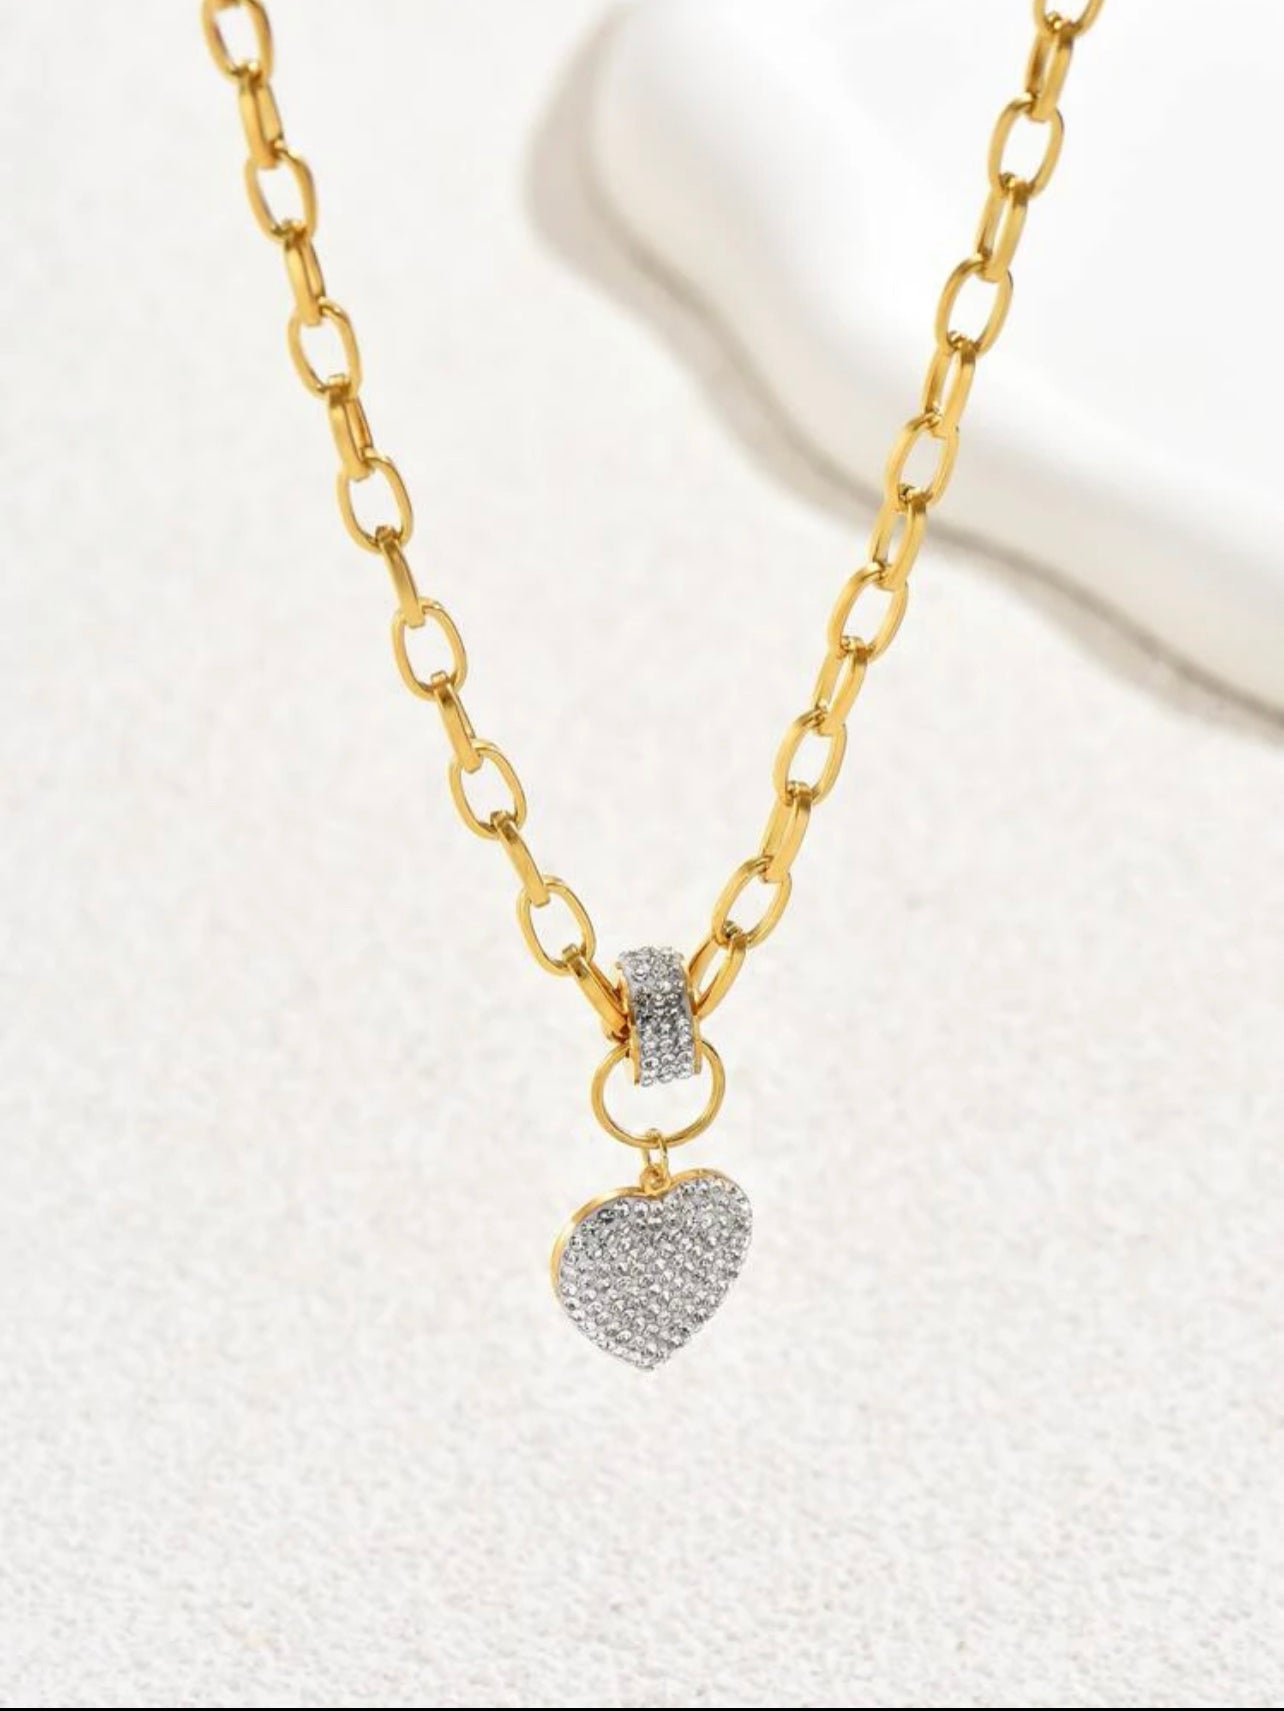 Zuri Gold Choker stainless steel necklace with CZ Diamond heart Pendant Necklace for women. 18K Z115